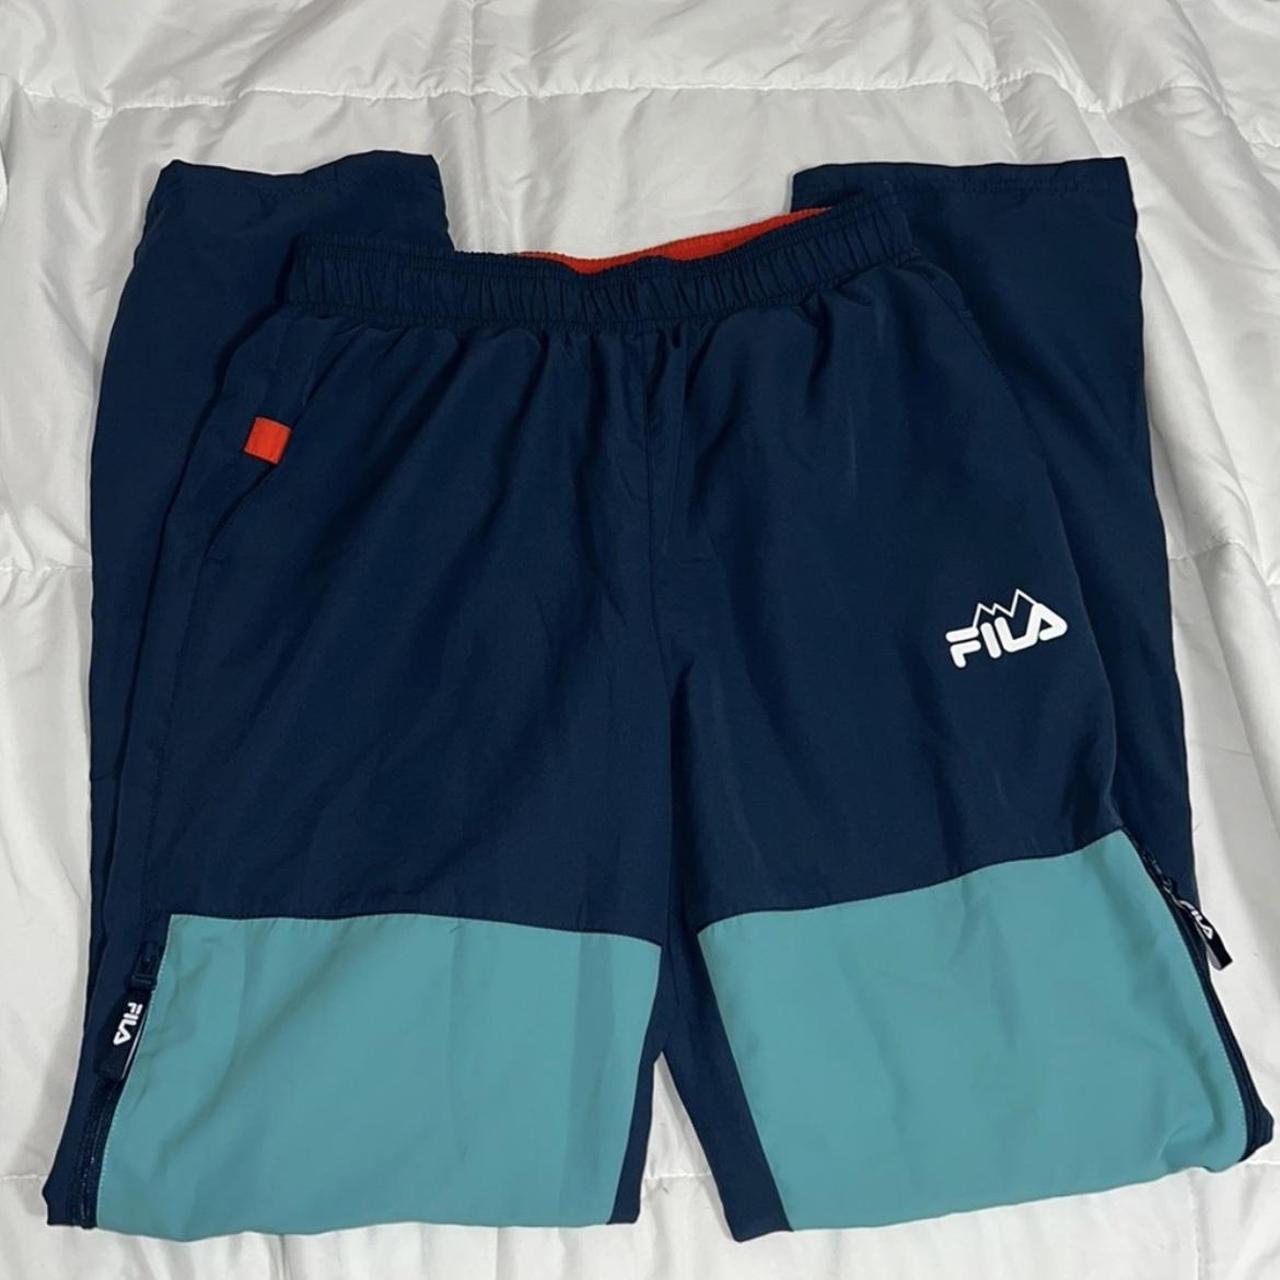 Fila pants in size small. They are in like new - Depop